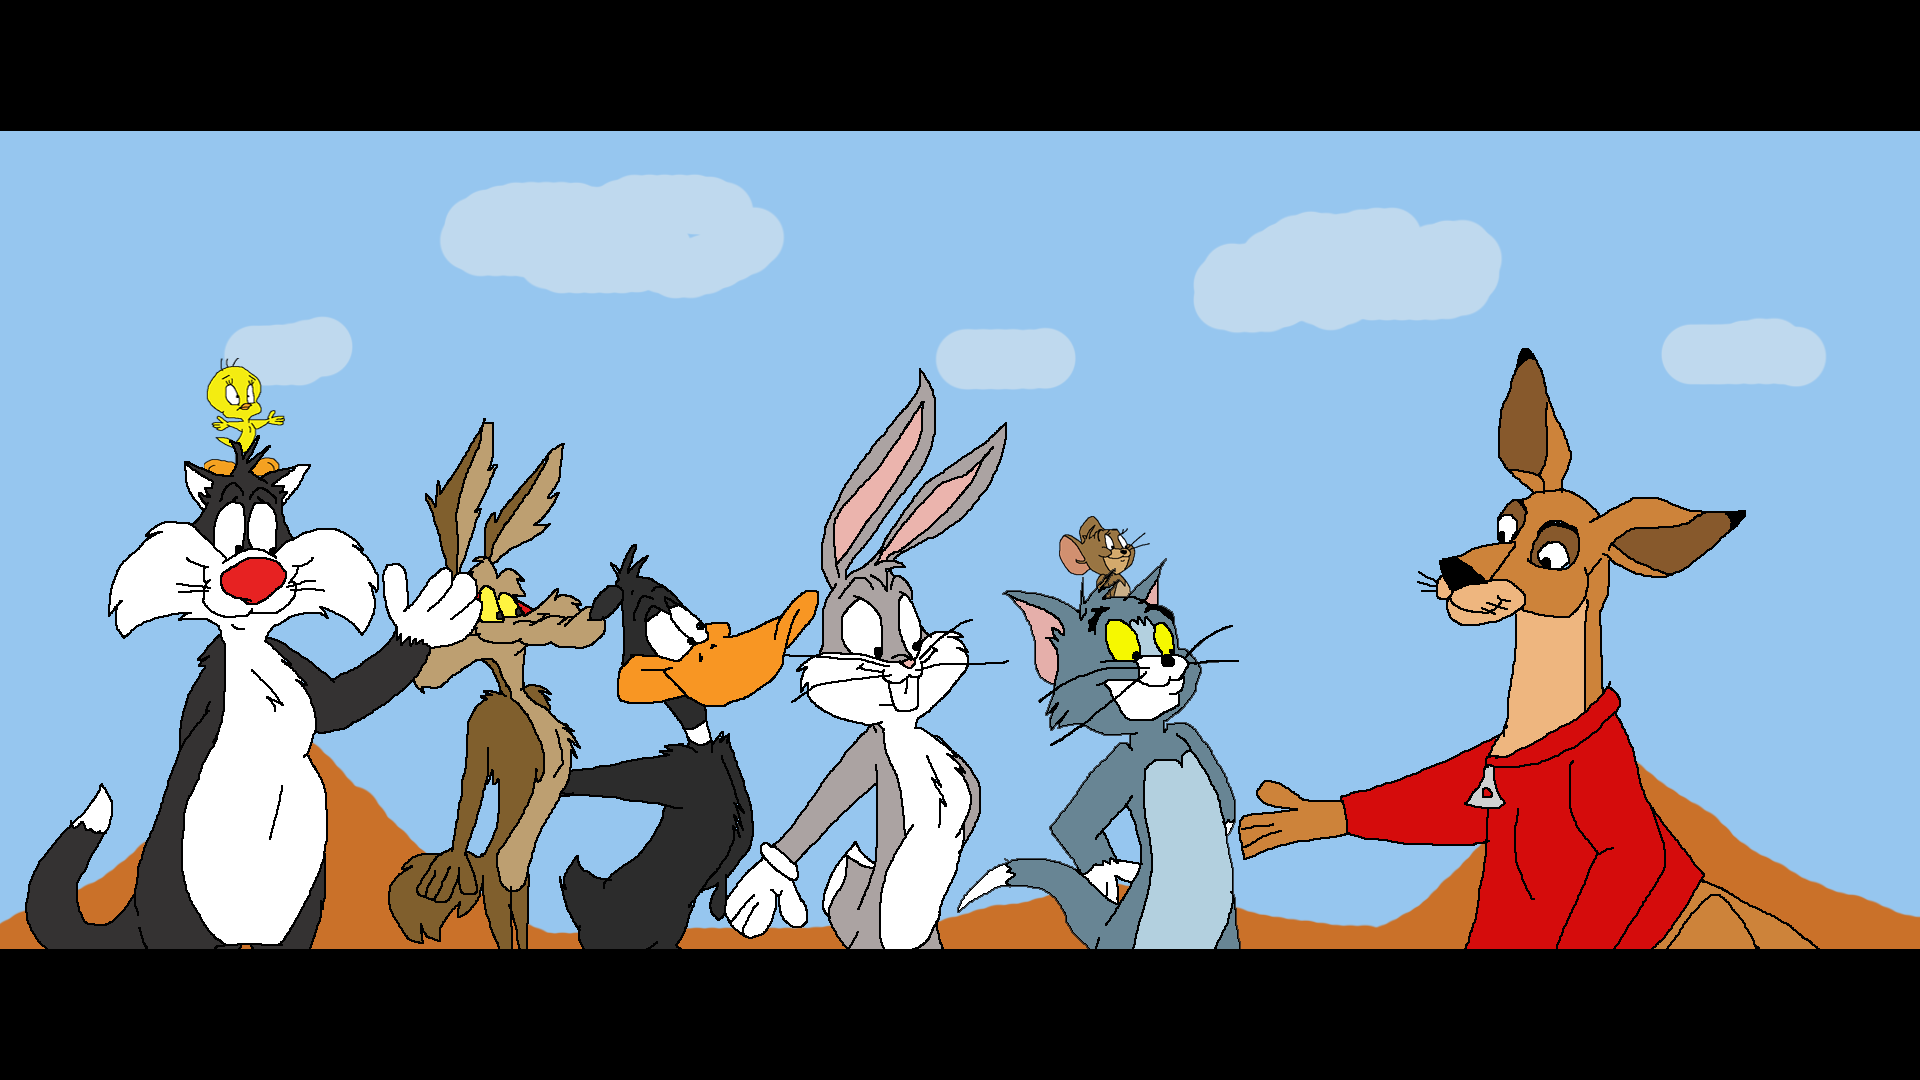 Looney Tunes, Tom and Jerry meet Jackie legs by TomArmstrong20 on DeviantArt